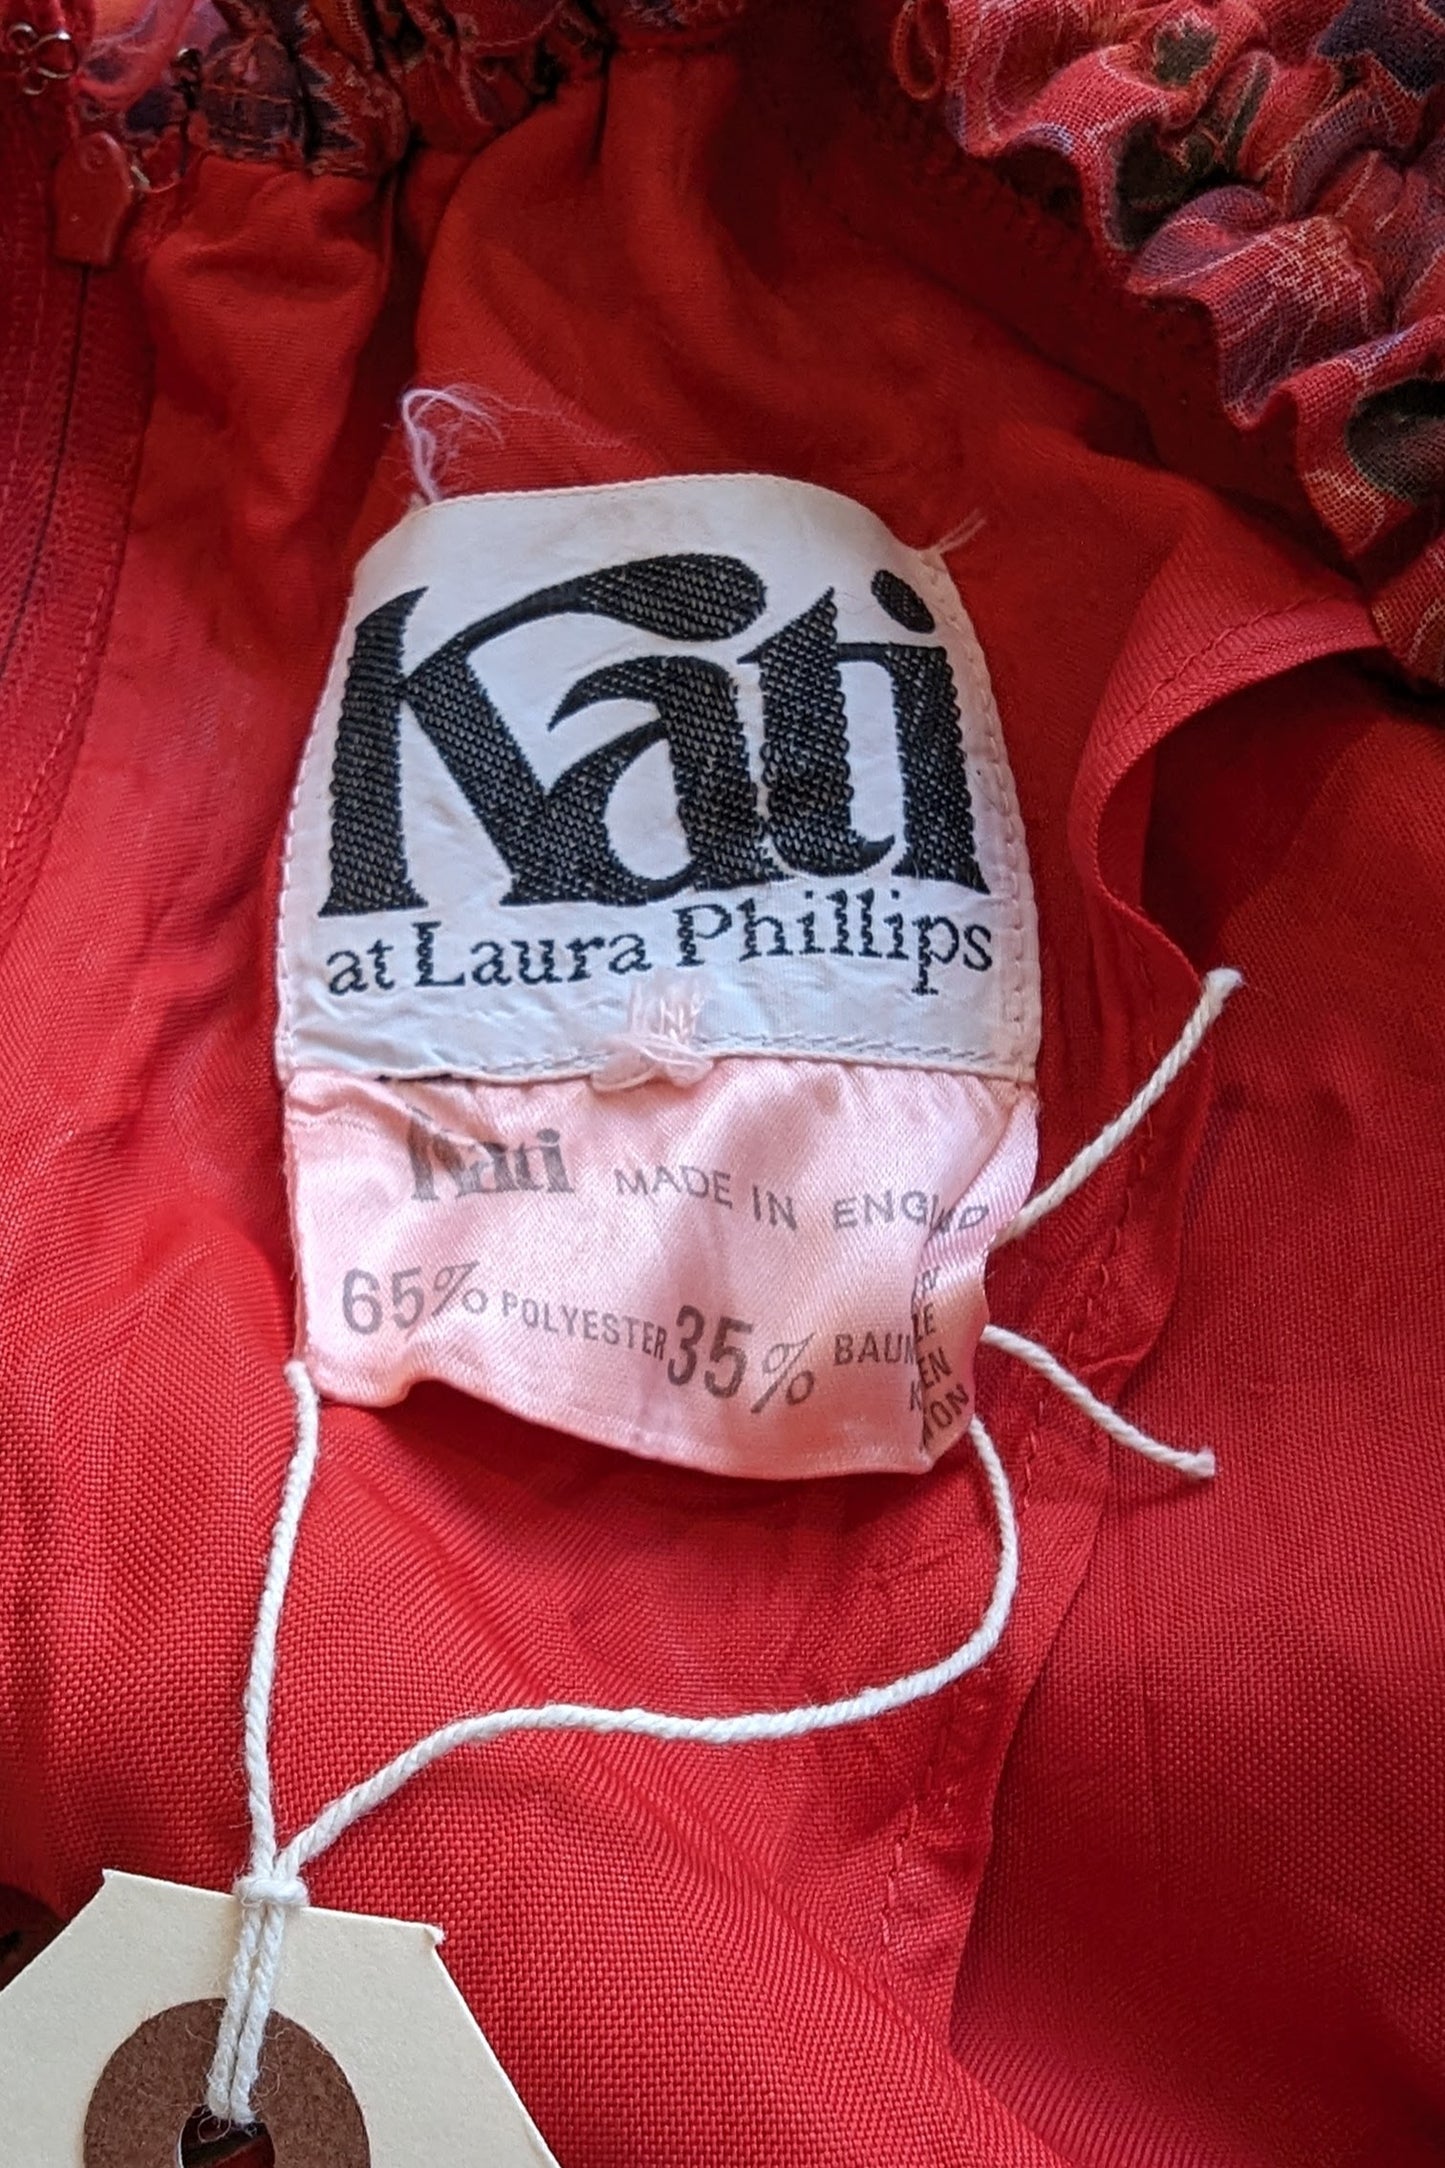 Kati at Laura Phillips Label on Red 70s Dress